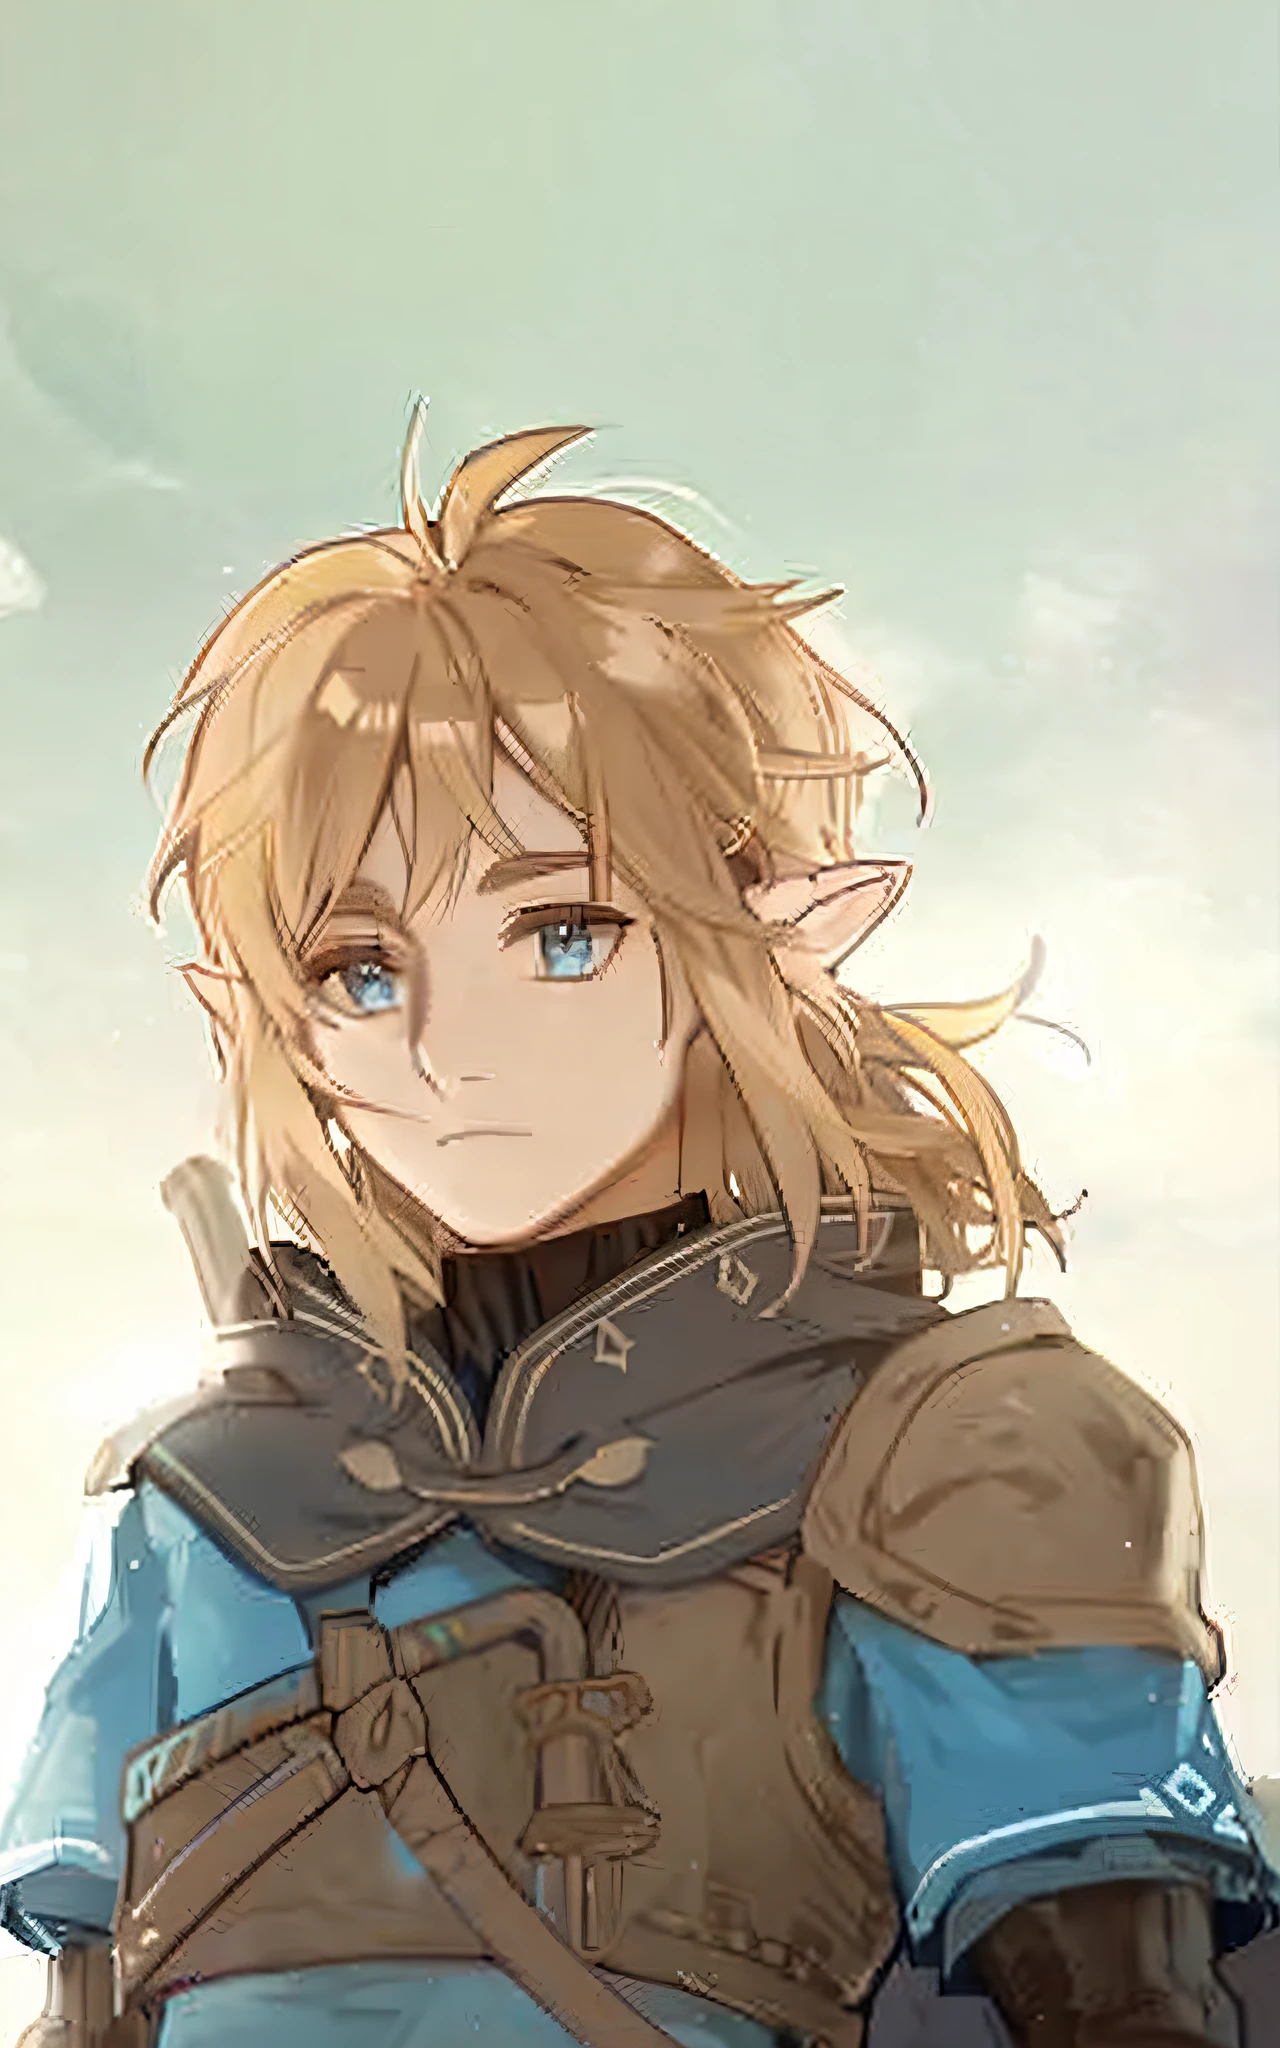 a close up of a person with a sword in a field, zelda botw, botw style, botw, female protagonist 👀 :8, female protagonist, portrait of zelda, from legend of zelda, link from zelda, breath of the wild style, a portrait of link, beautiful androgynous prince, zelda, breath of the wild art style